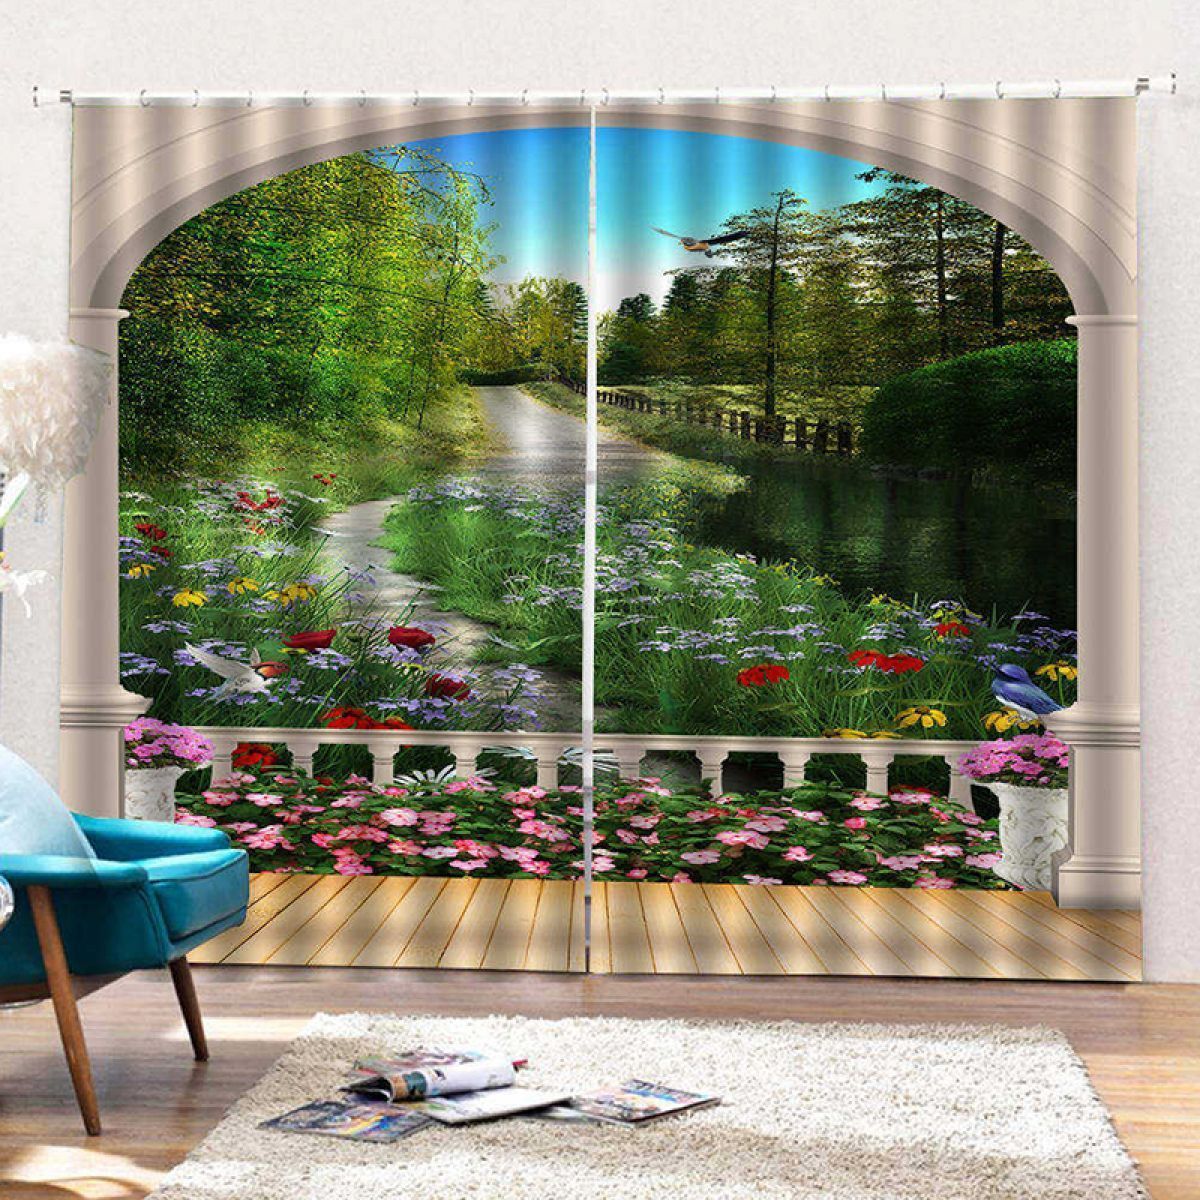 Awesome Scenery Printed Window Curtain Home Decor